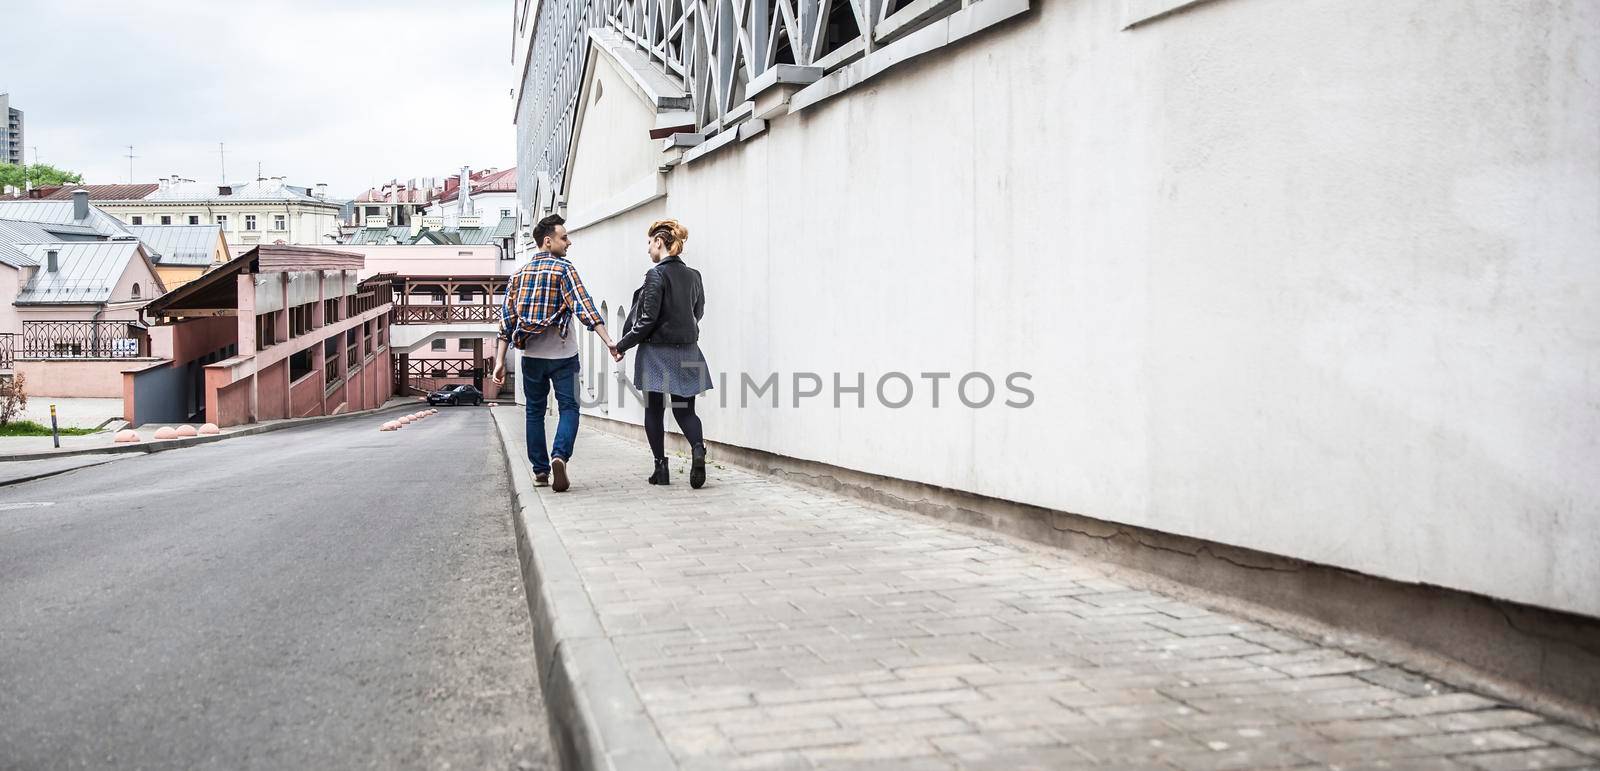 photographer takes photos of lovers on the street.city life.